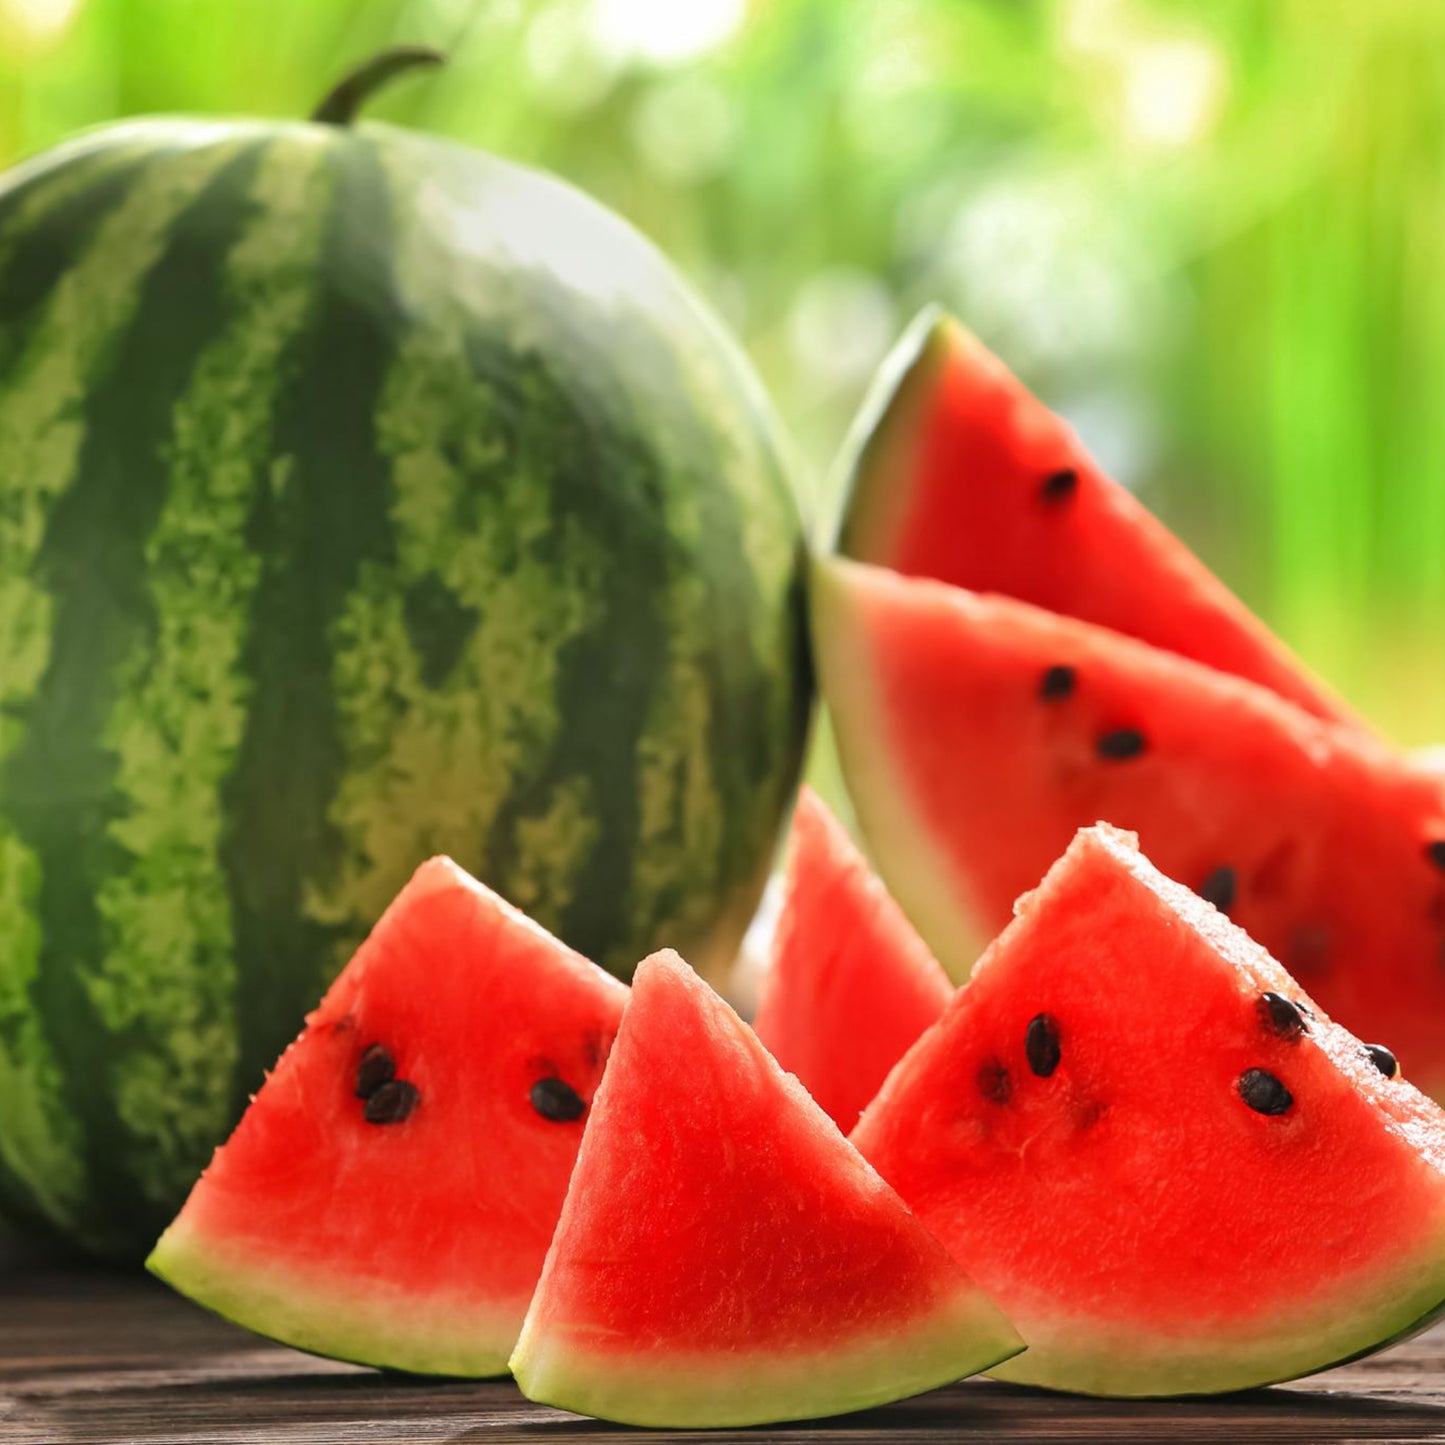 Sugar Baby Watermelon Seeds - Non Gmo - Heirloom Seeds – Watermelon Seeds - Grow Your Own Food At Home! - Fast Growing Variety!